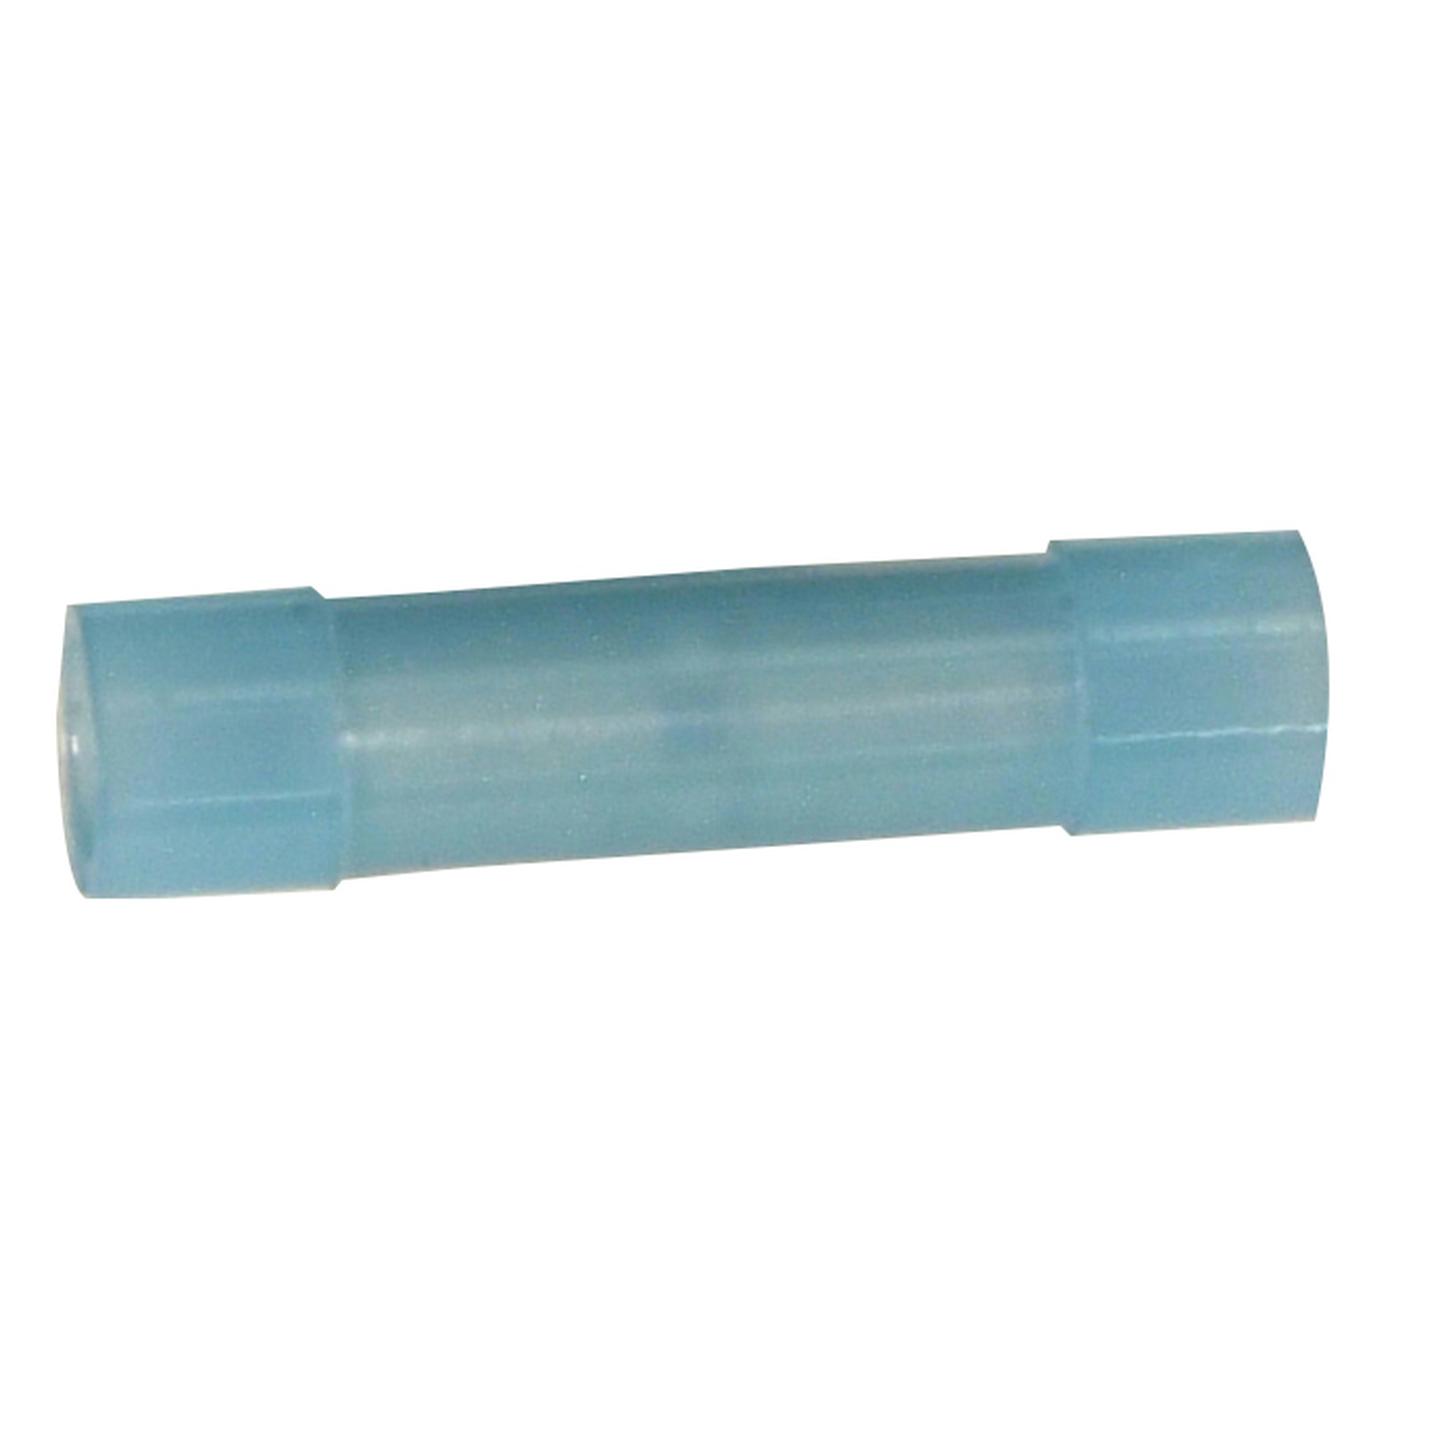 Butt Connector - Blue - Pack of 100